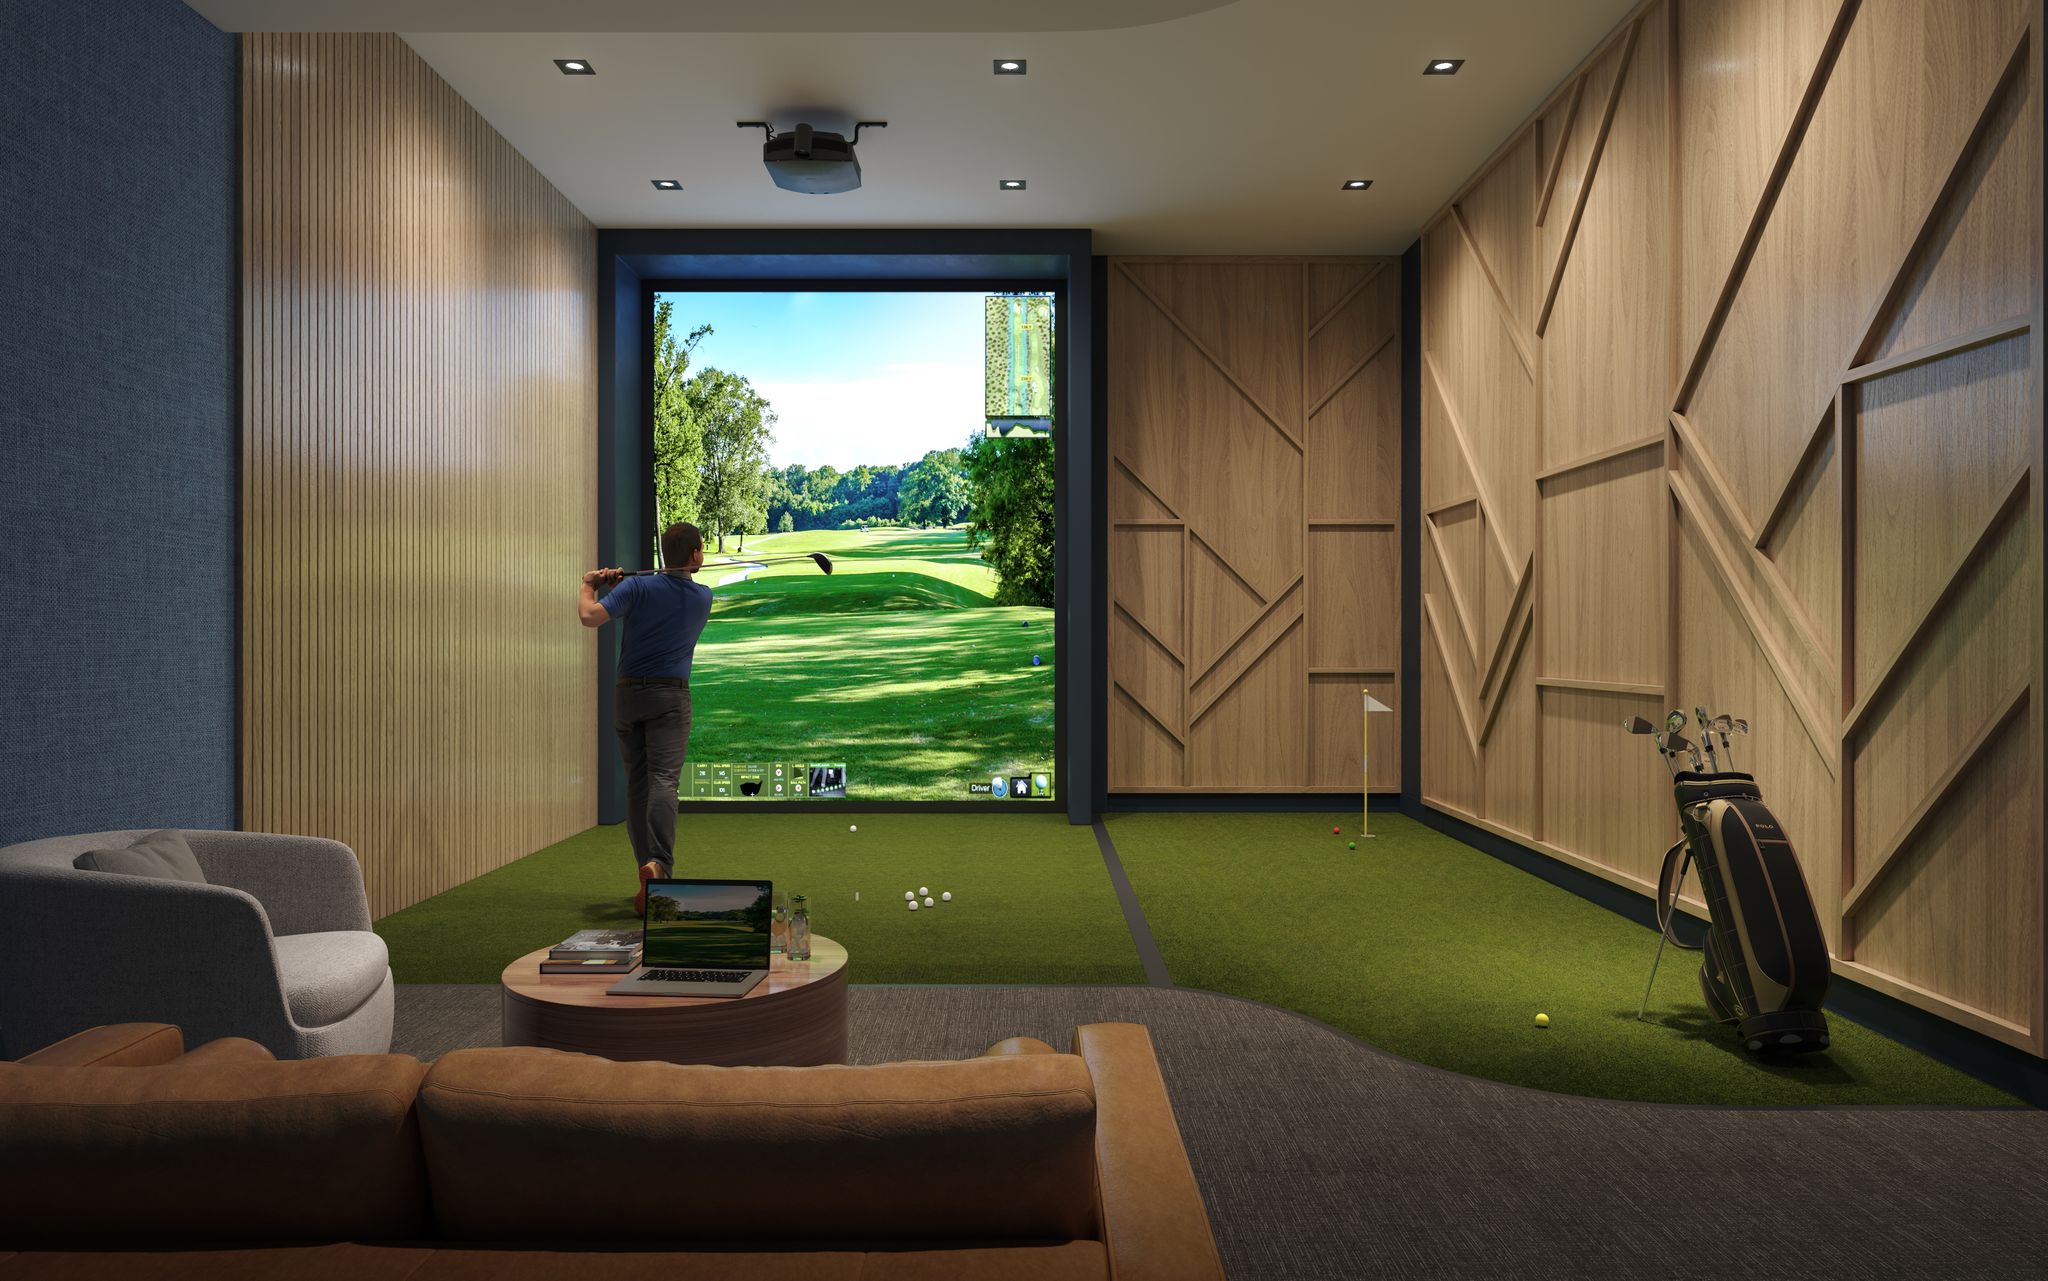 Lakeview_DXE_Club_Golf_Simulator-min